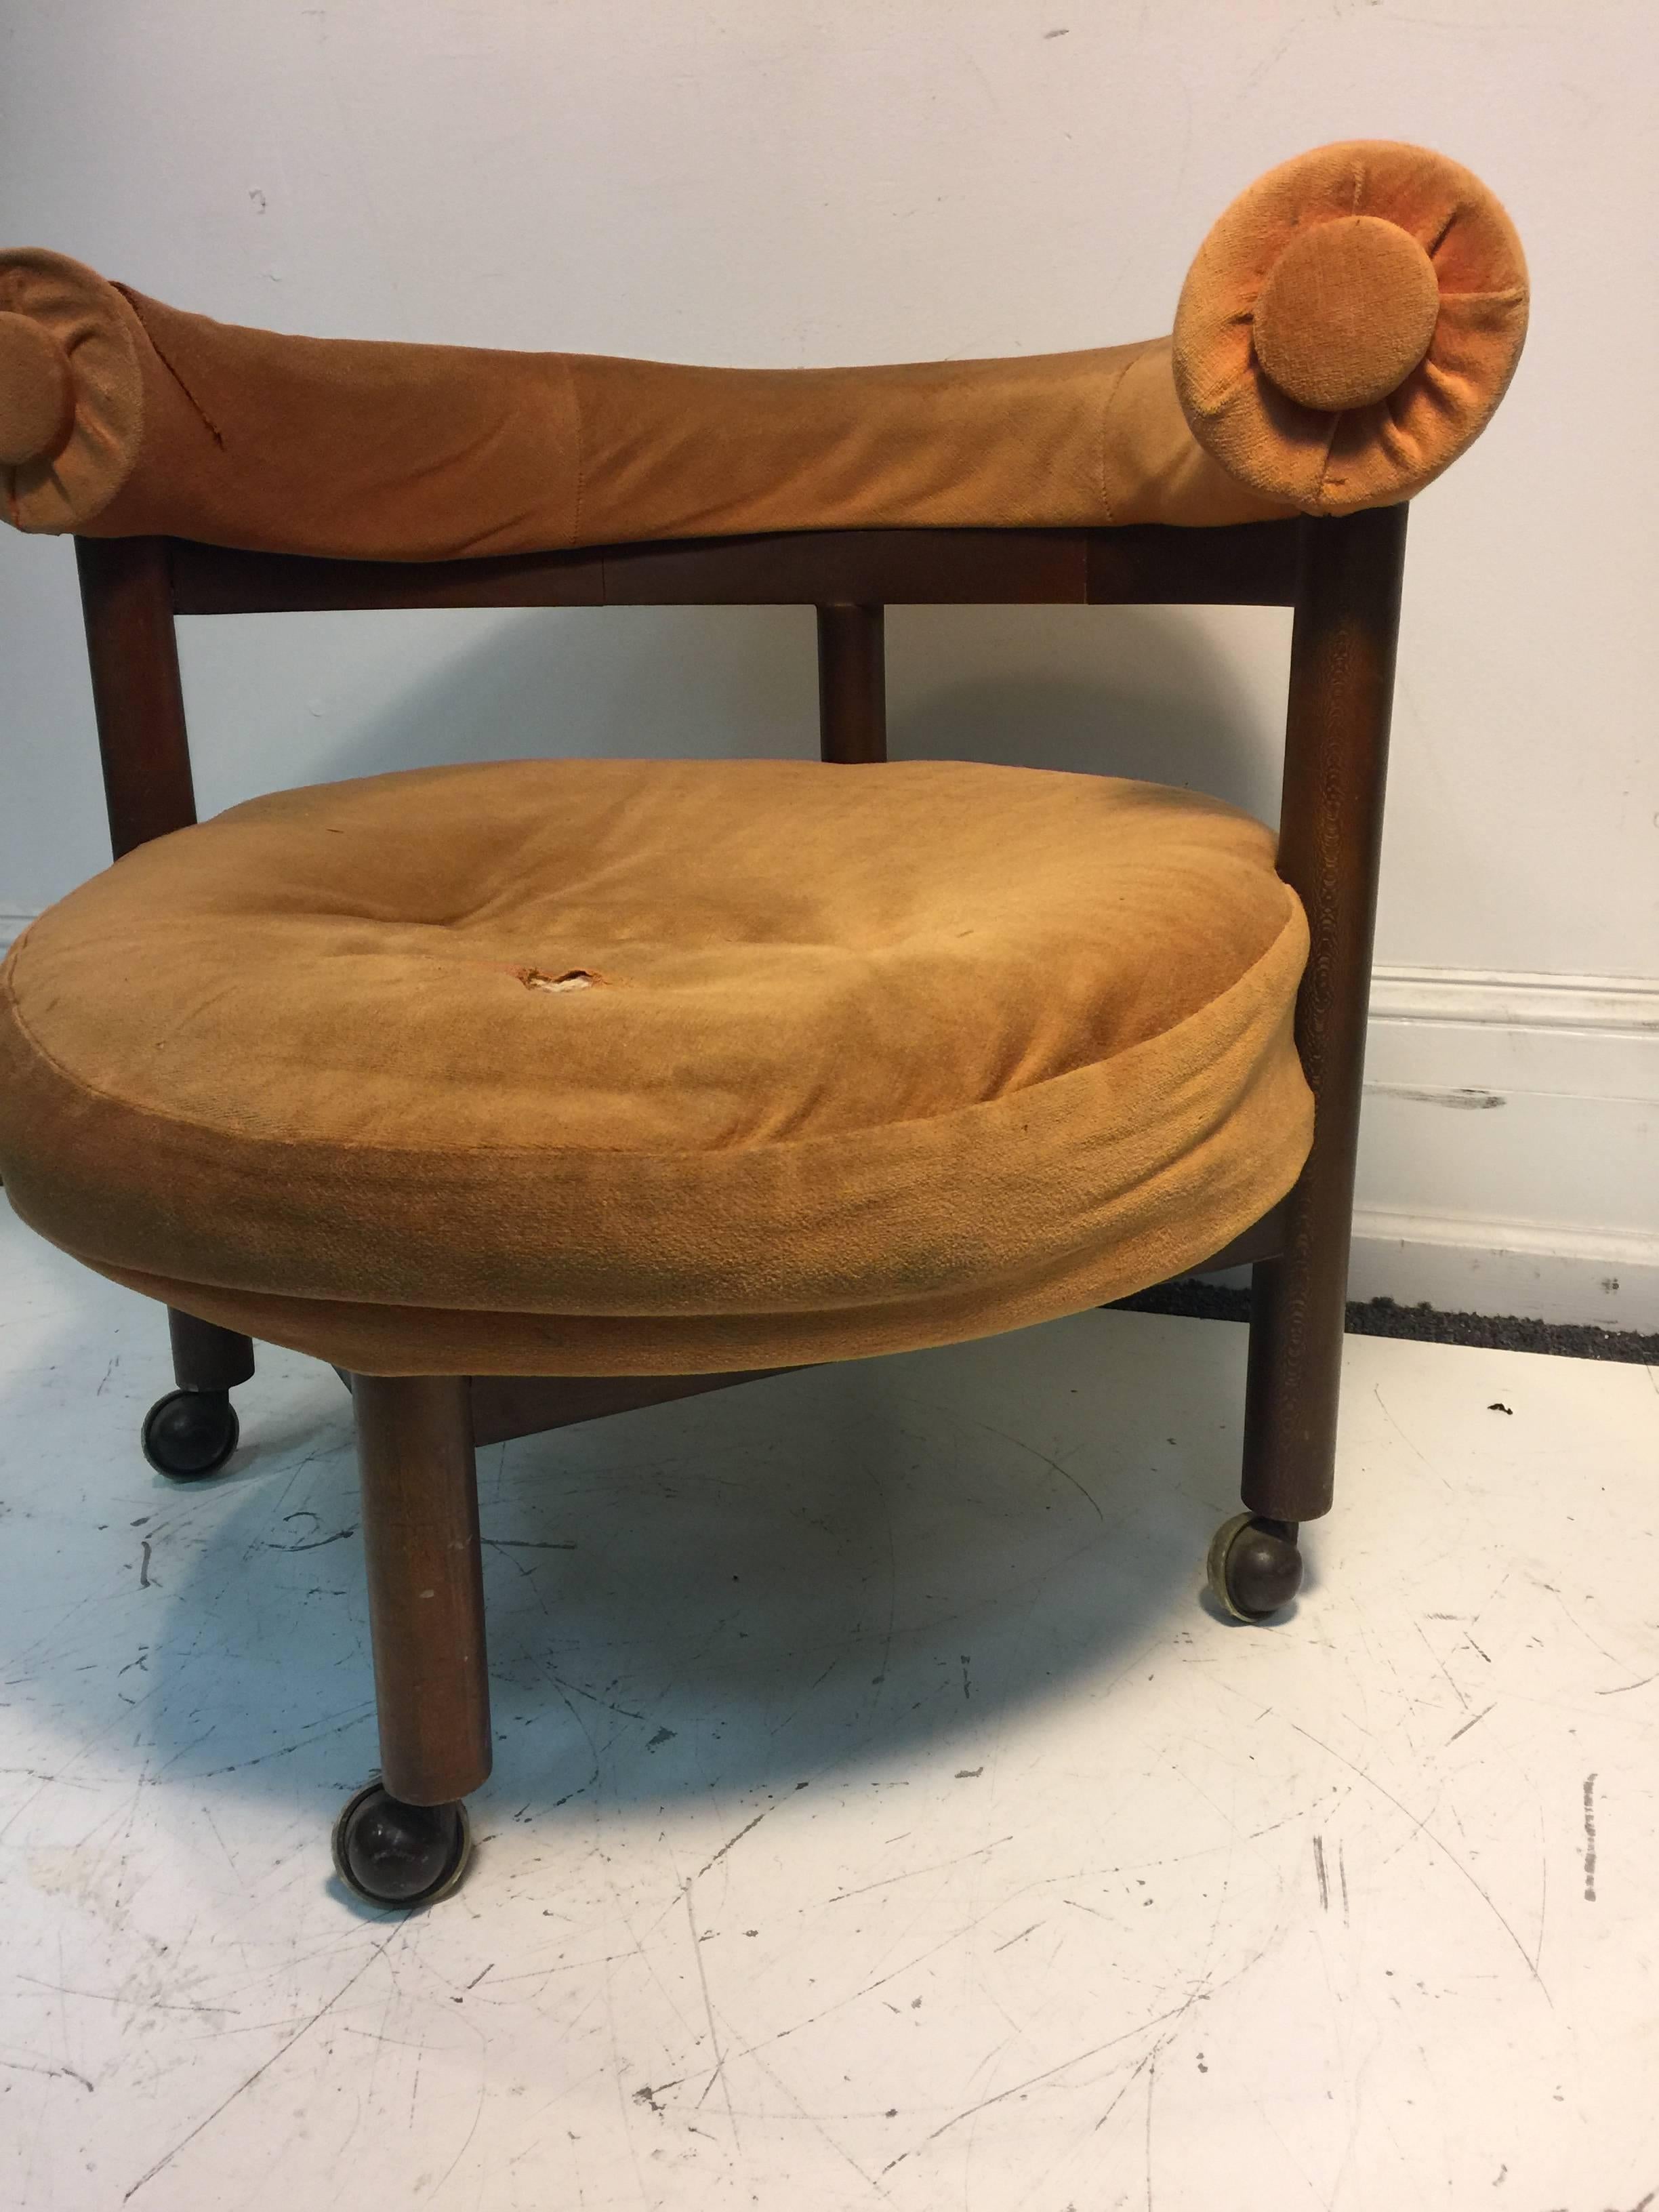 An unusual Danish Modern round chair on casters in the manner of Hans Wegner, circa 1970. Good vintage condition with age appropriate wear. Recommended re-upholstery.